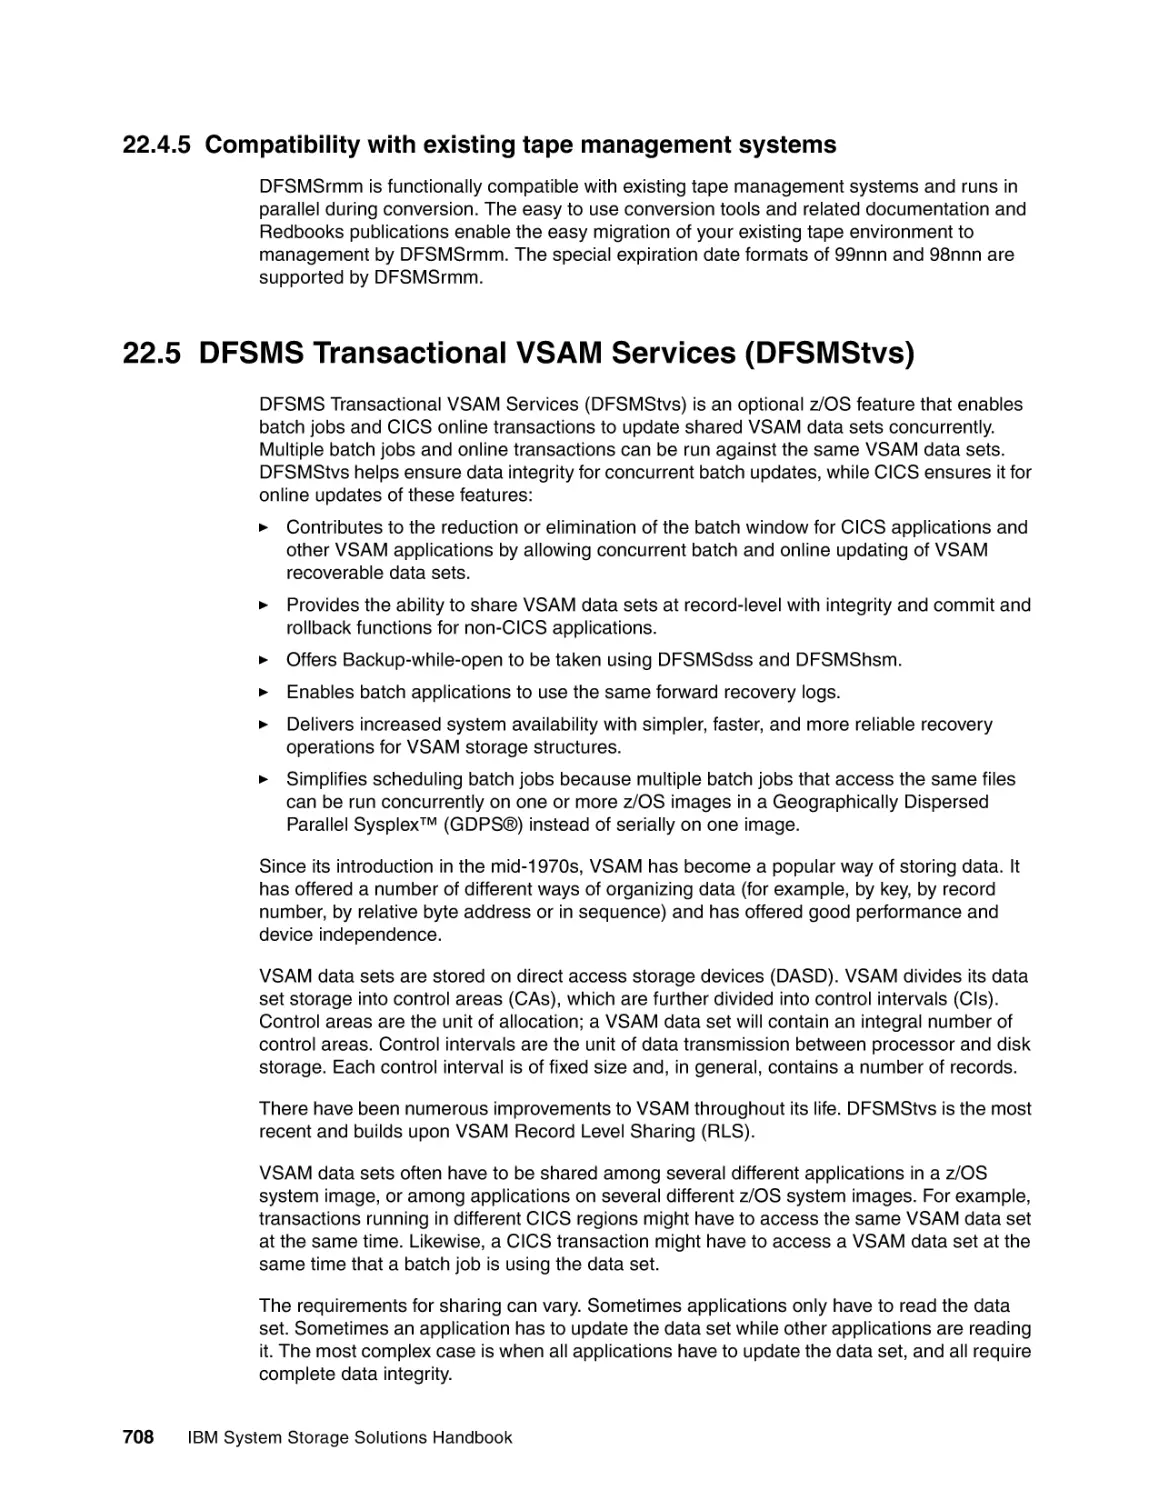 22.4.5 Compatibility with existing tape management systems
22.5 DFSMS Transactional VSAM Services (DFSMStvs)